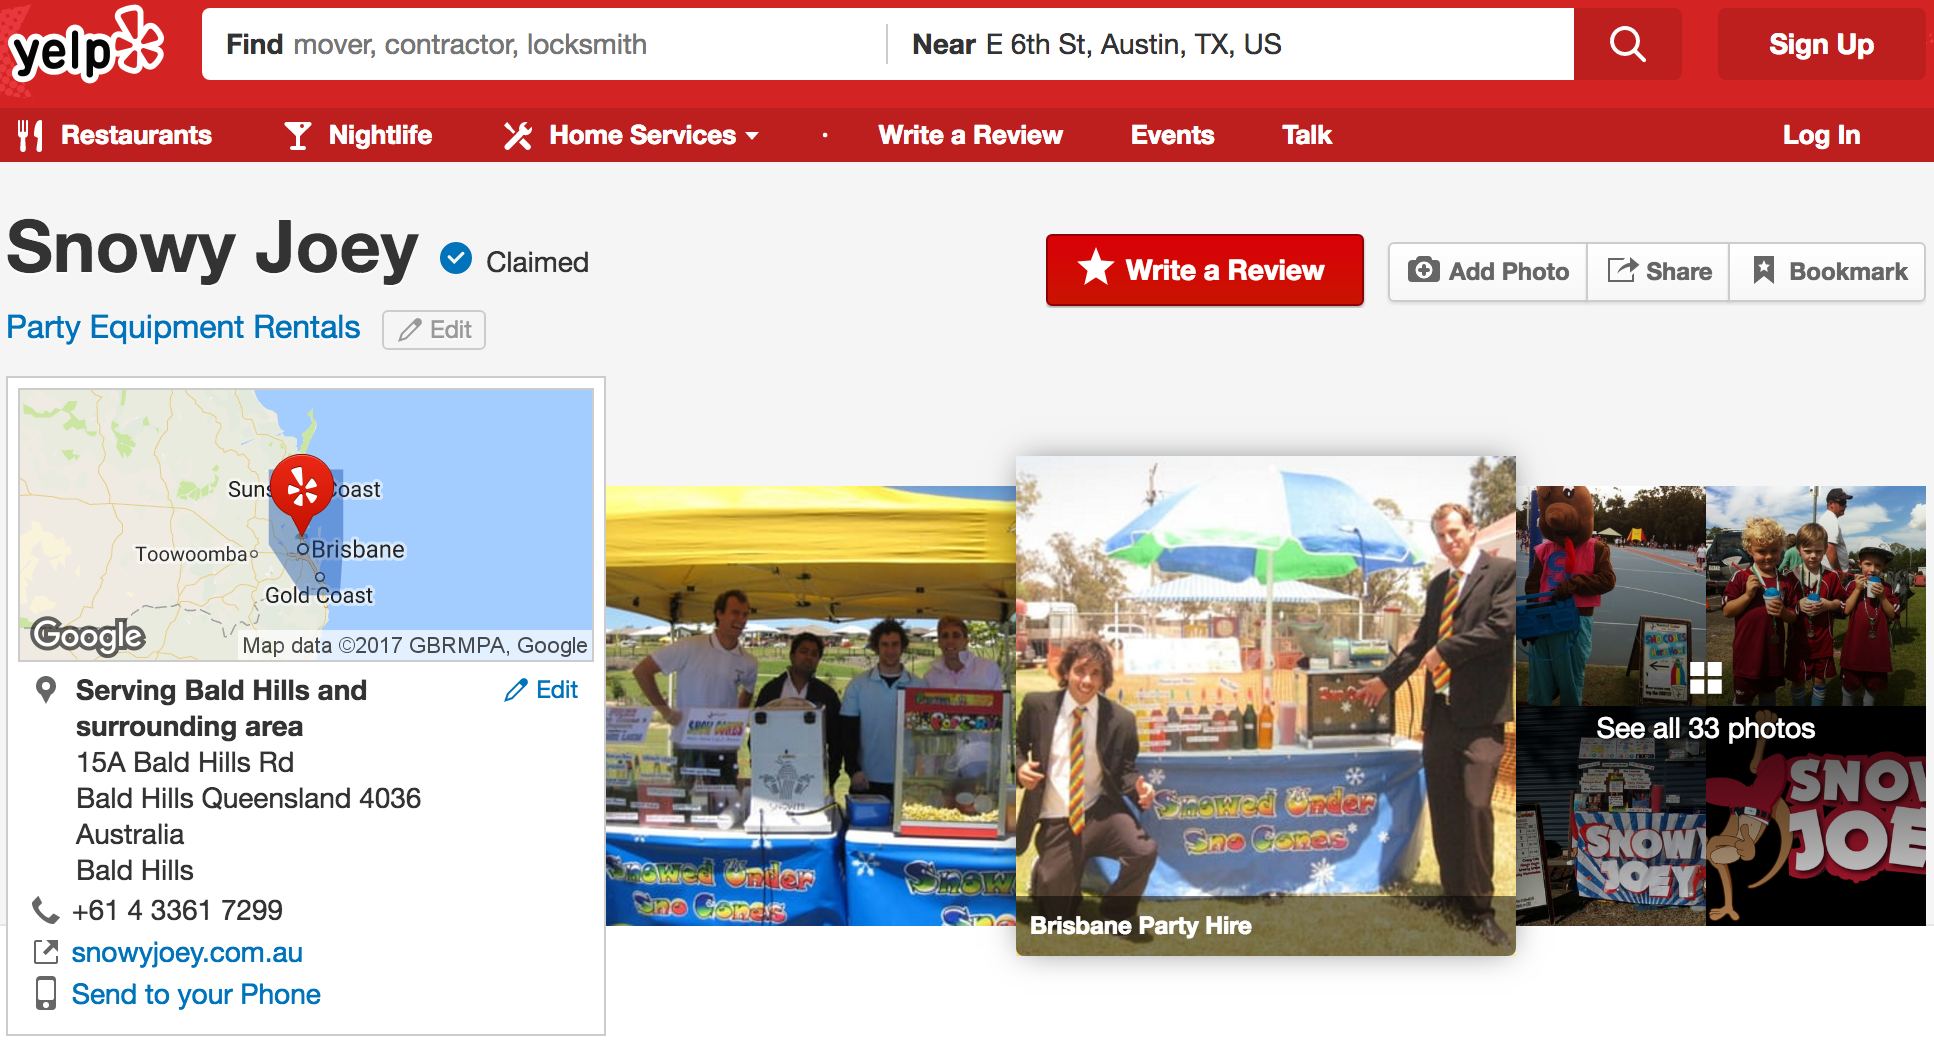 Screenshot showing the Yelp page for Snowy Joey